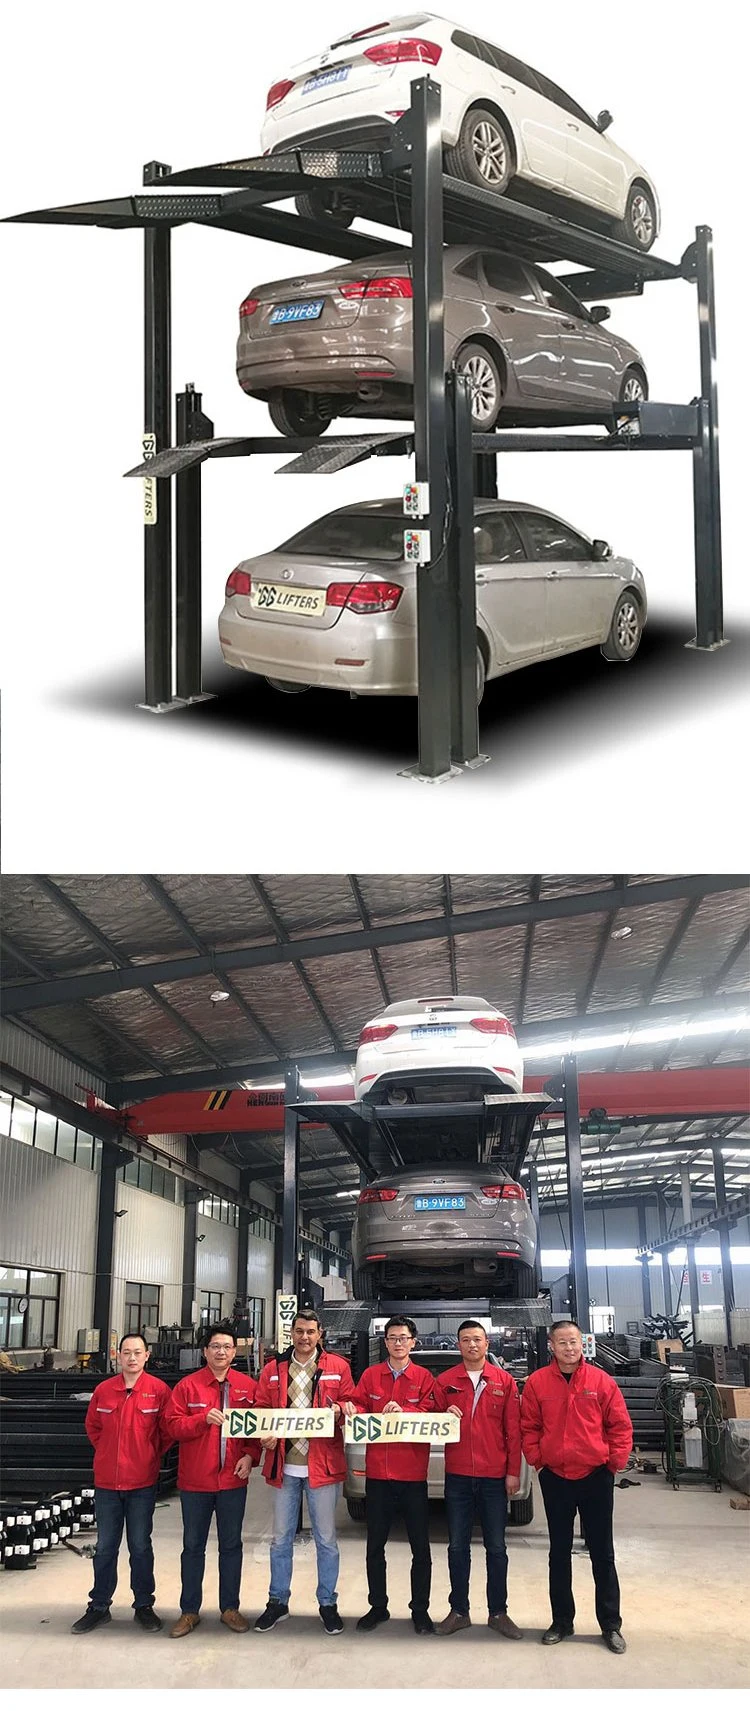 Real factory 4 post triple stacker car parking lift automatic hydraulic garage parking system vehicle car parking lift CE certification